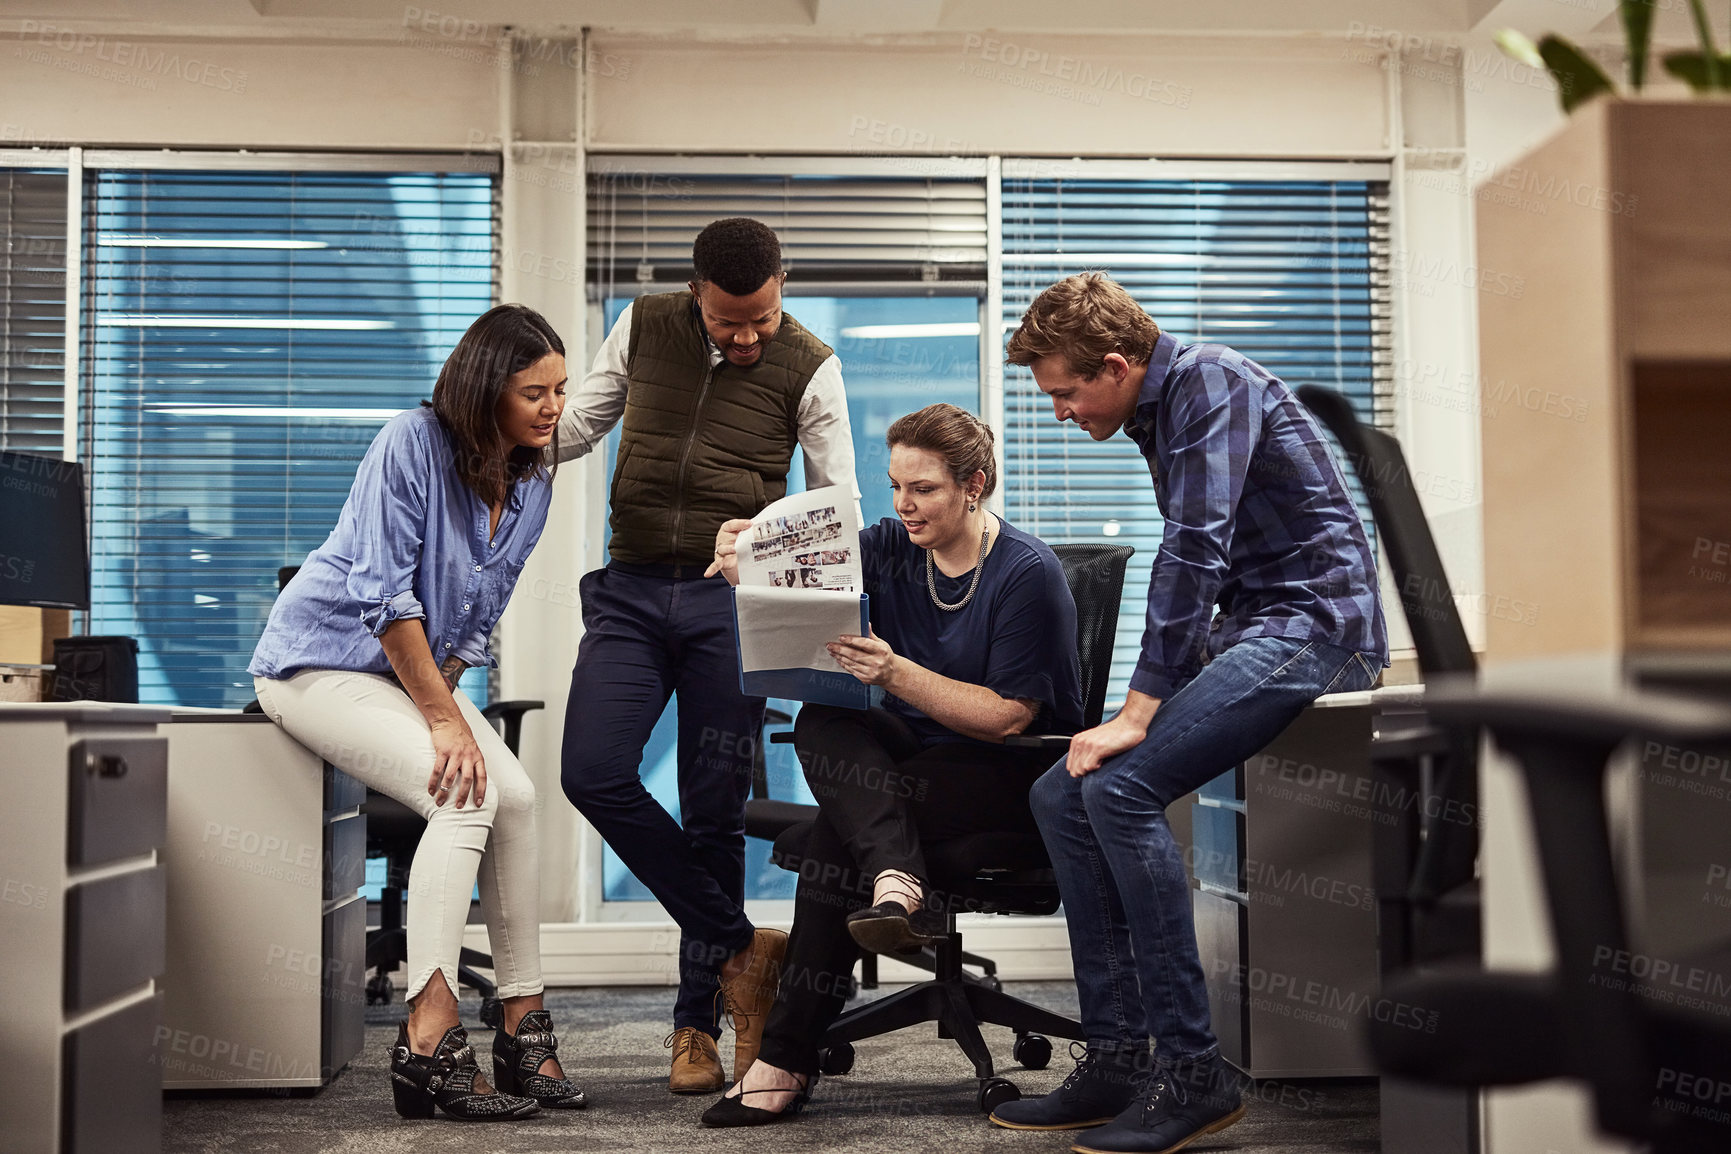 Buy stock photo Shot of a group of designers brainstorming together in an office